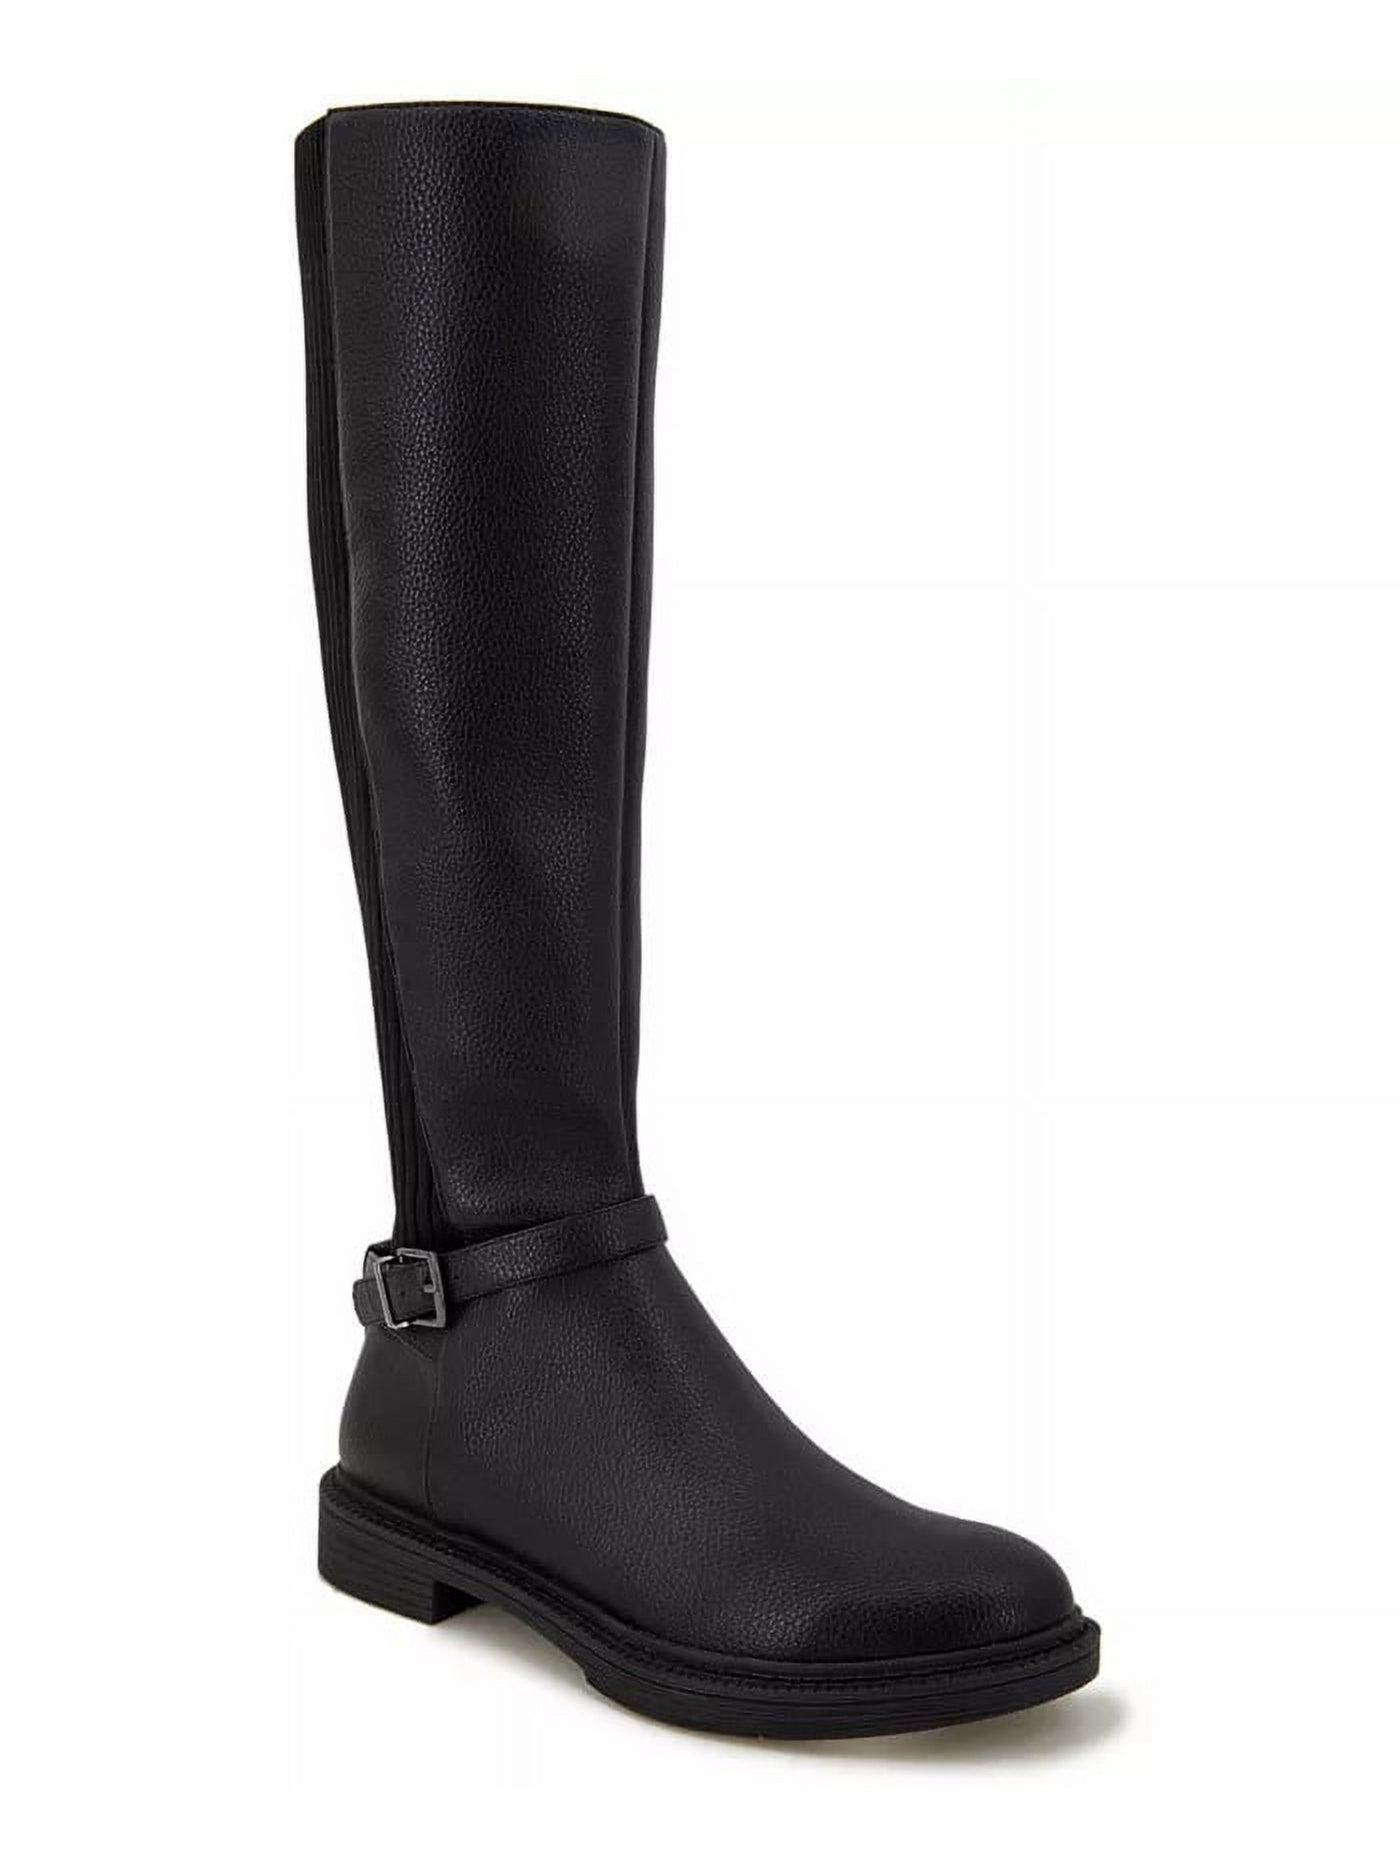 KENNETH COLE Womens Black Buckle Accent Lug Sole Winona Round Toe Block Heel Zip-Up Riding Boot 7.5 M